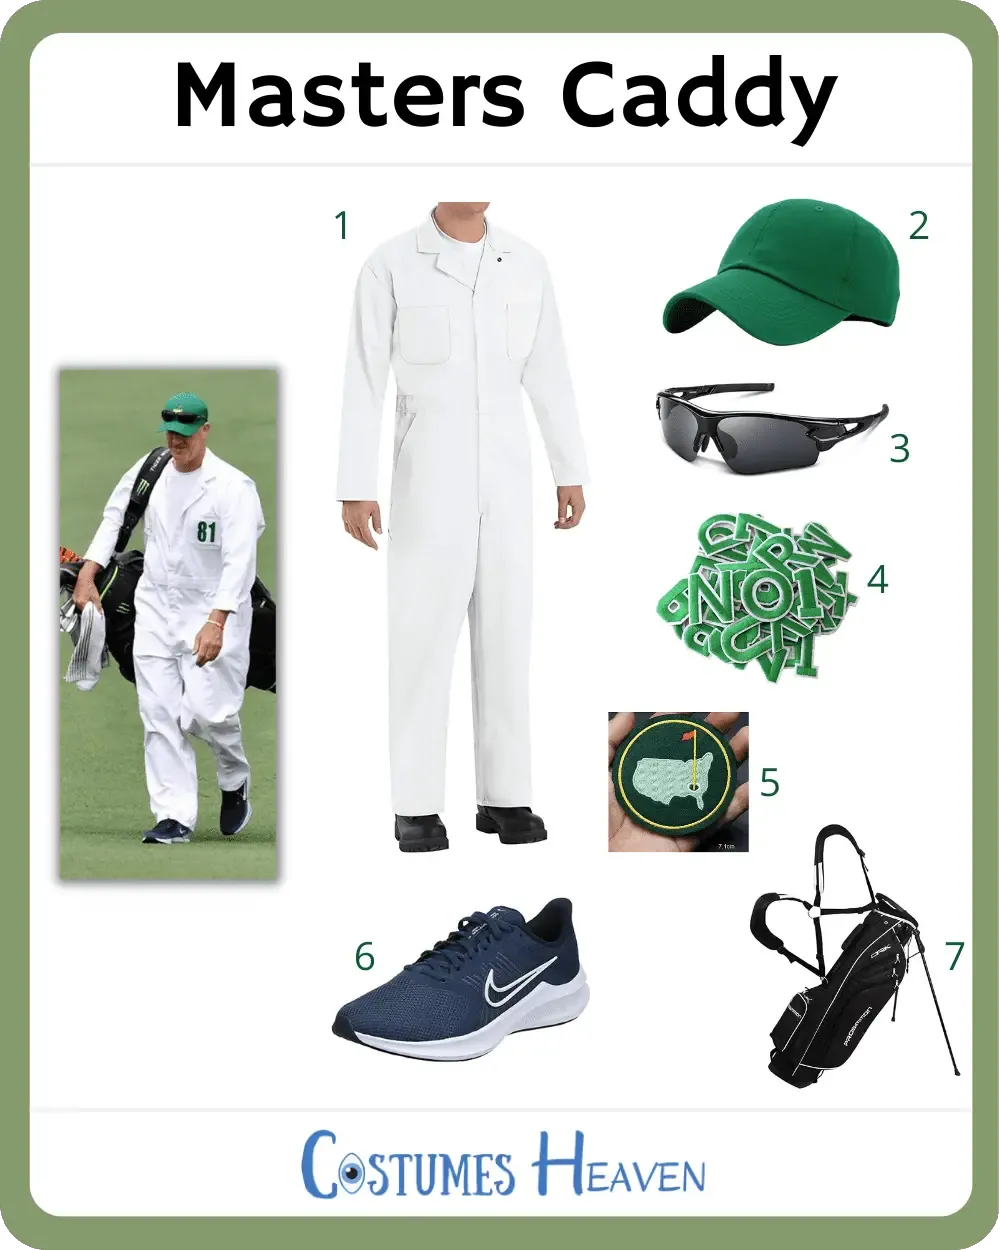 Masters Caddy Costume